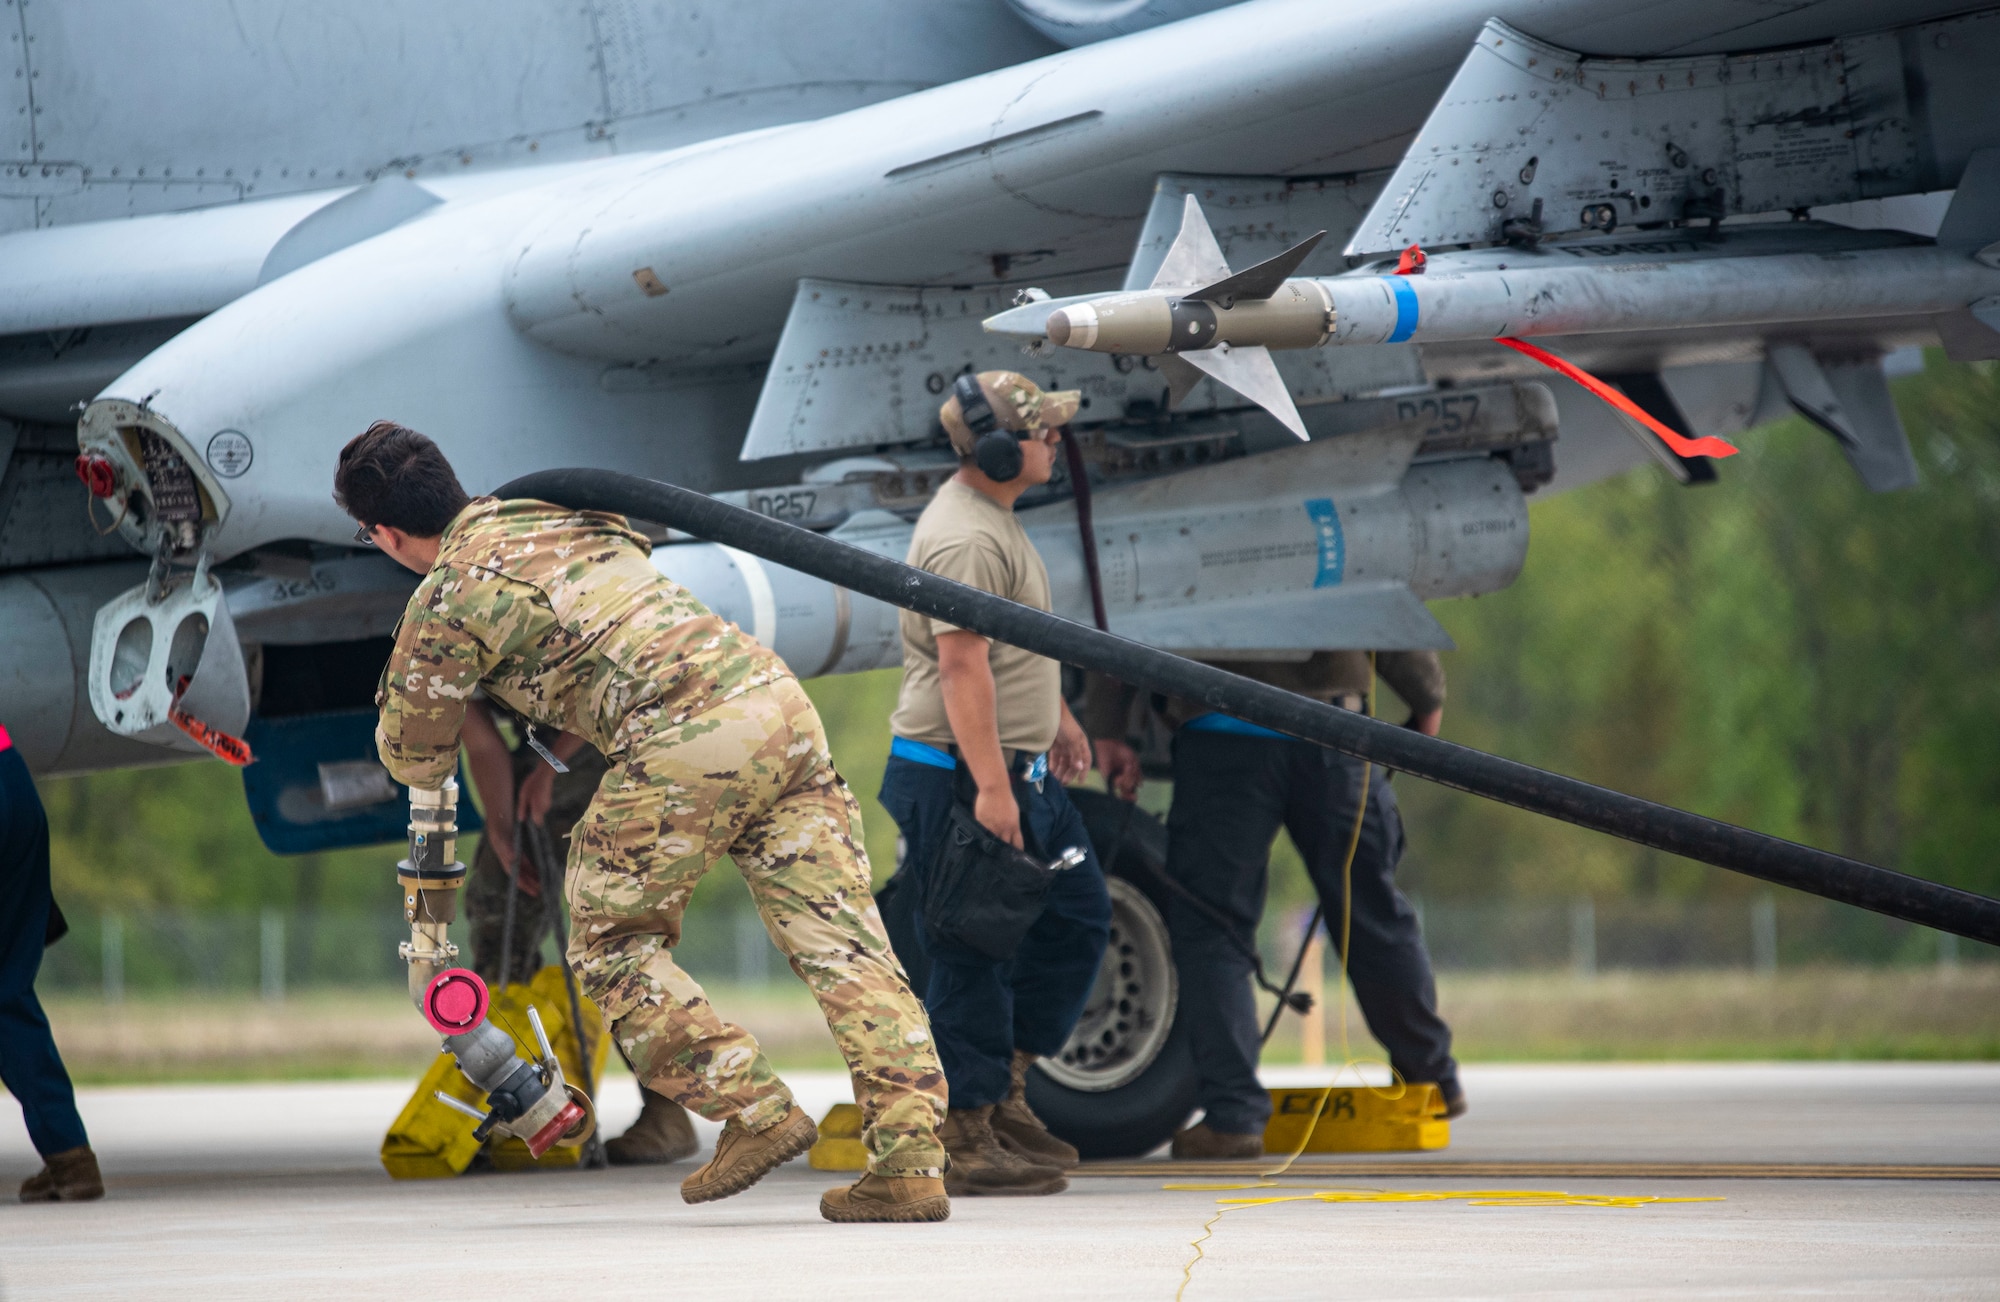 An A-10 Thunderbolt II is refueled May 25, 2021, during exercise Mobility Guardian at Alpena Combat Readiness Training Center, Michigan. Mobility Guardian is a training exercise designed to prepare Airmen to face real-world security challenges and sustain strategic deterrence anywhere in the world. (U.S. Air Force photo by Airman 1st Class Matthew Porter)